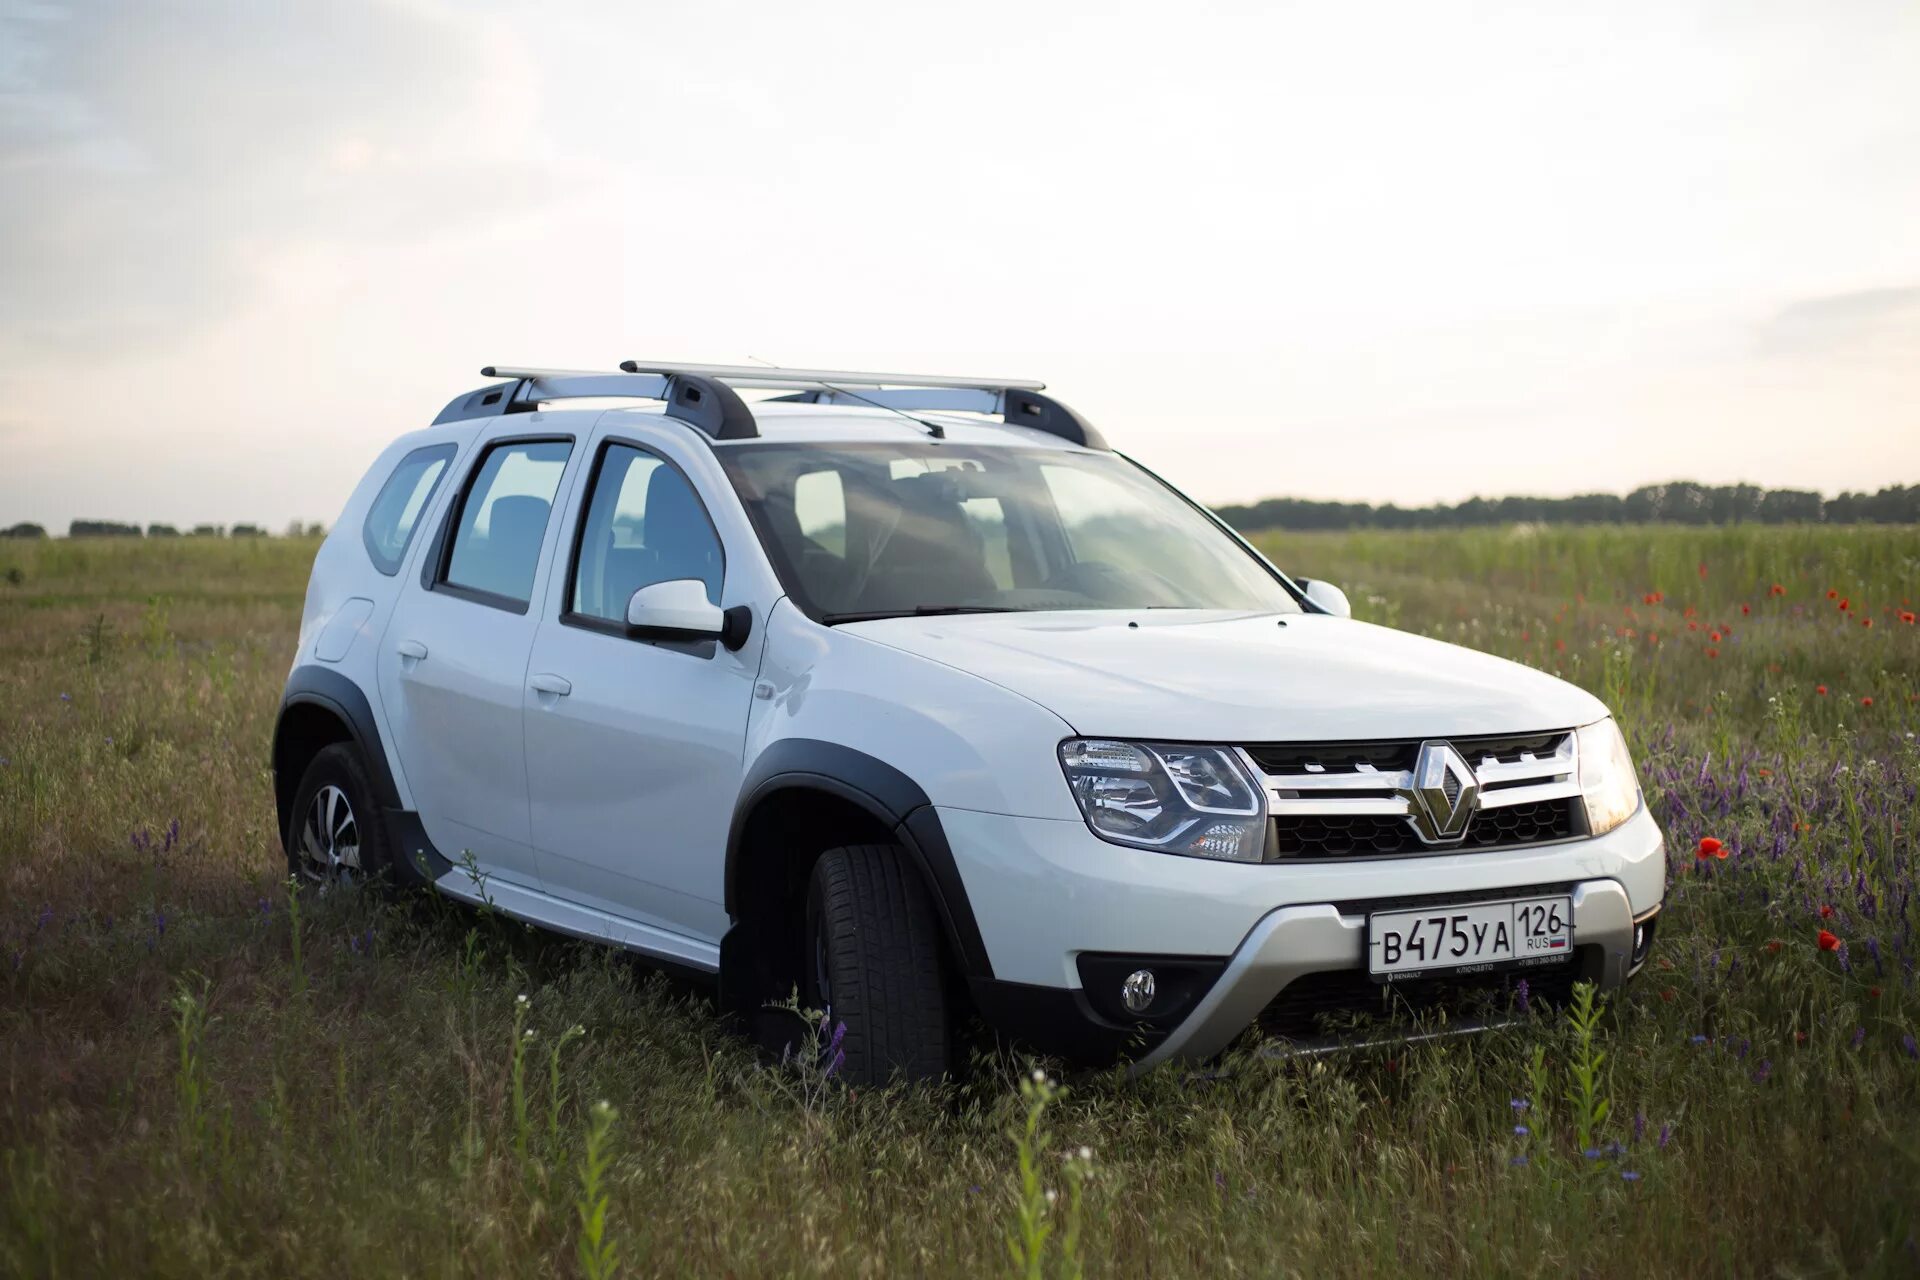 Renault Duster 1. Дастер 1 Рестайлинг. Renault Duster 2005. Renault Duster 4.